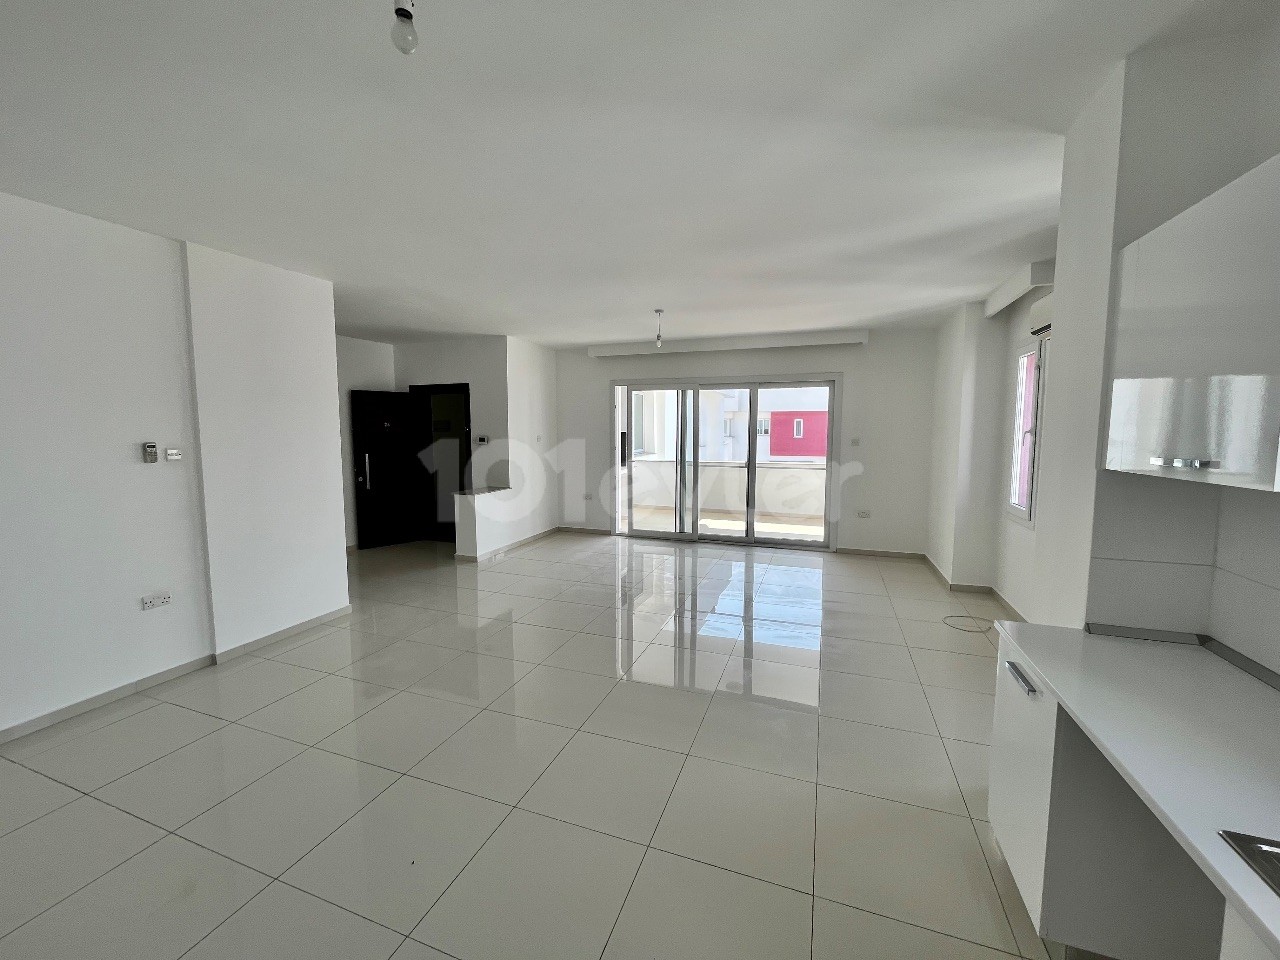 3 bedroom penthouse for sale in the center of Kyrenia 